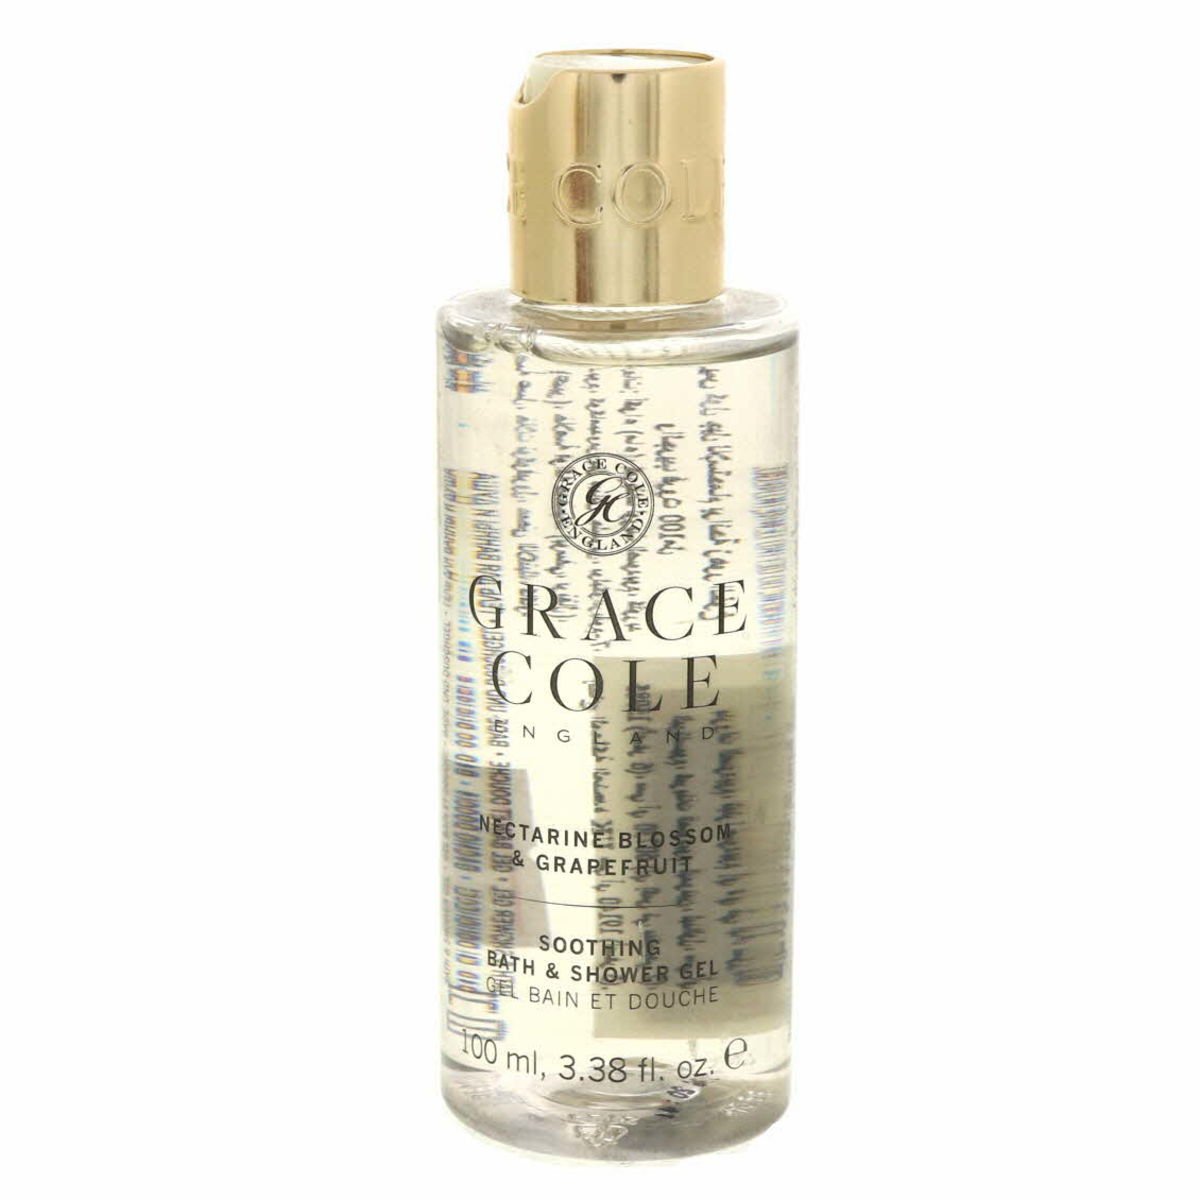 Grace Cole Soothing Bath And Shower Gel Nectarine Blossom And Grapefruit 100ml